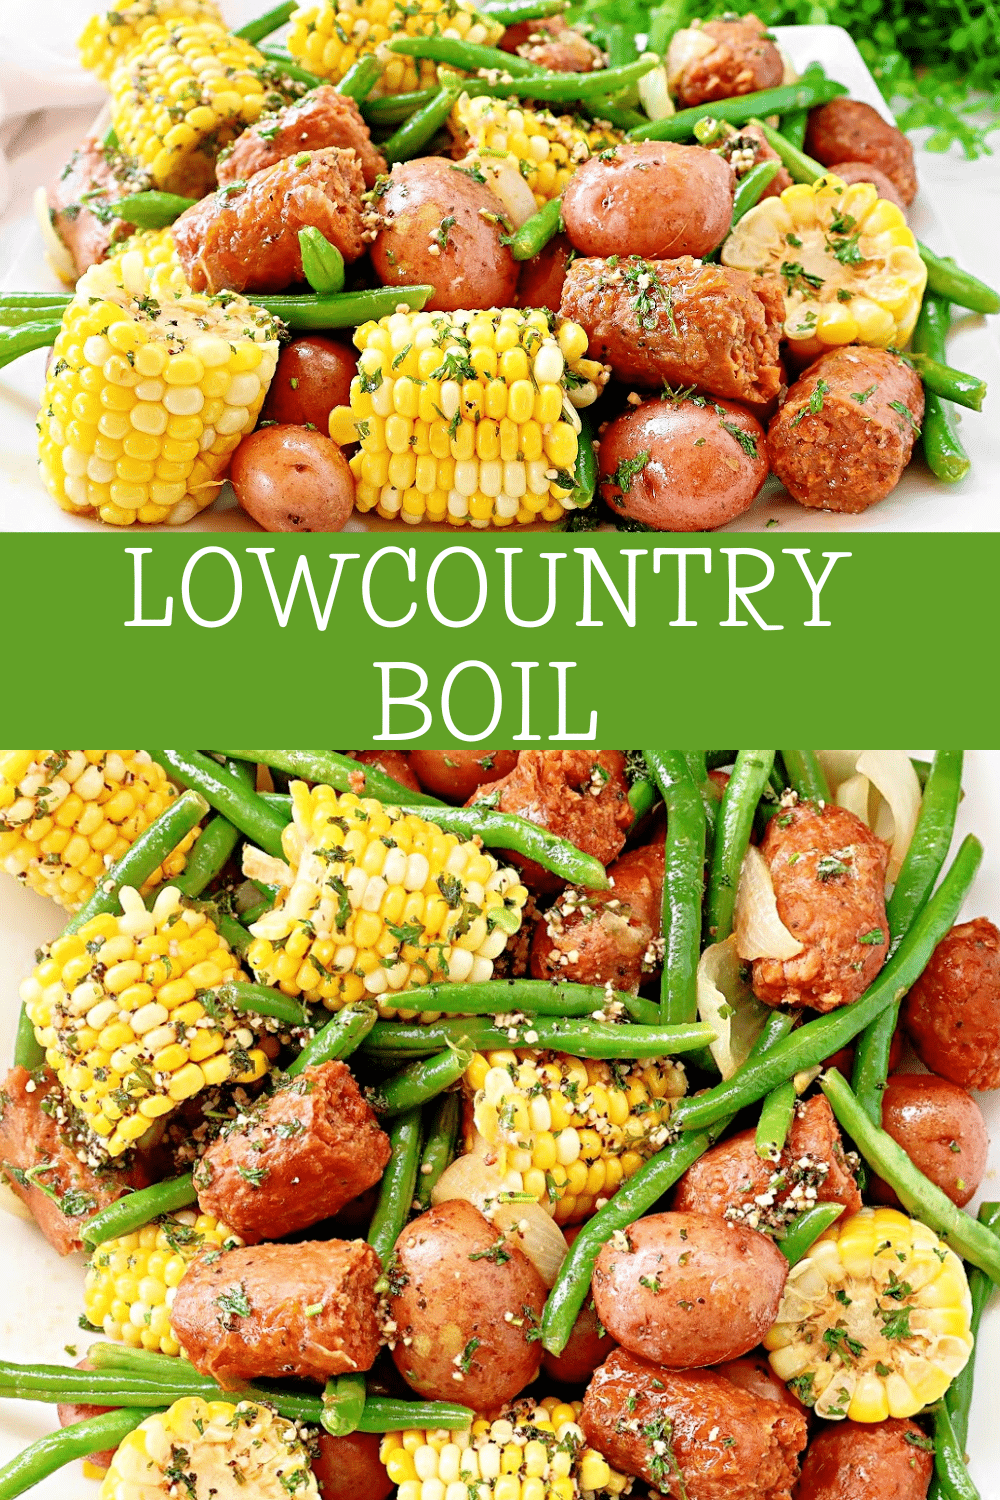 Lowcountry Boil ~ Southern-style feast with red potatoes, plant-based sausage, sweet corn, green beans, and aromatic spices, all drenched in garlic butter. via @thiswifecooks